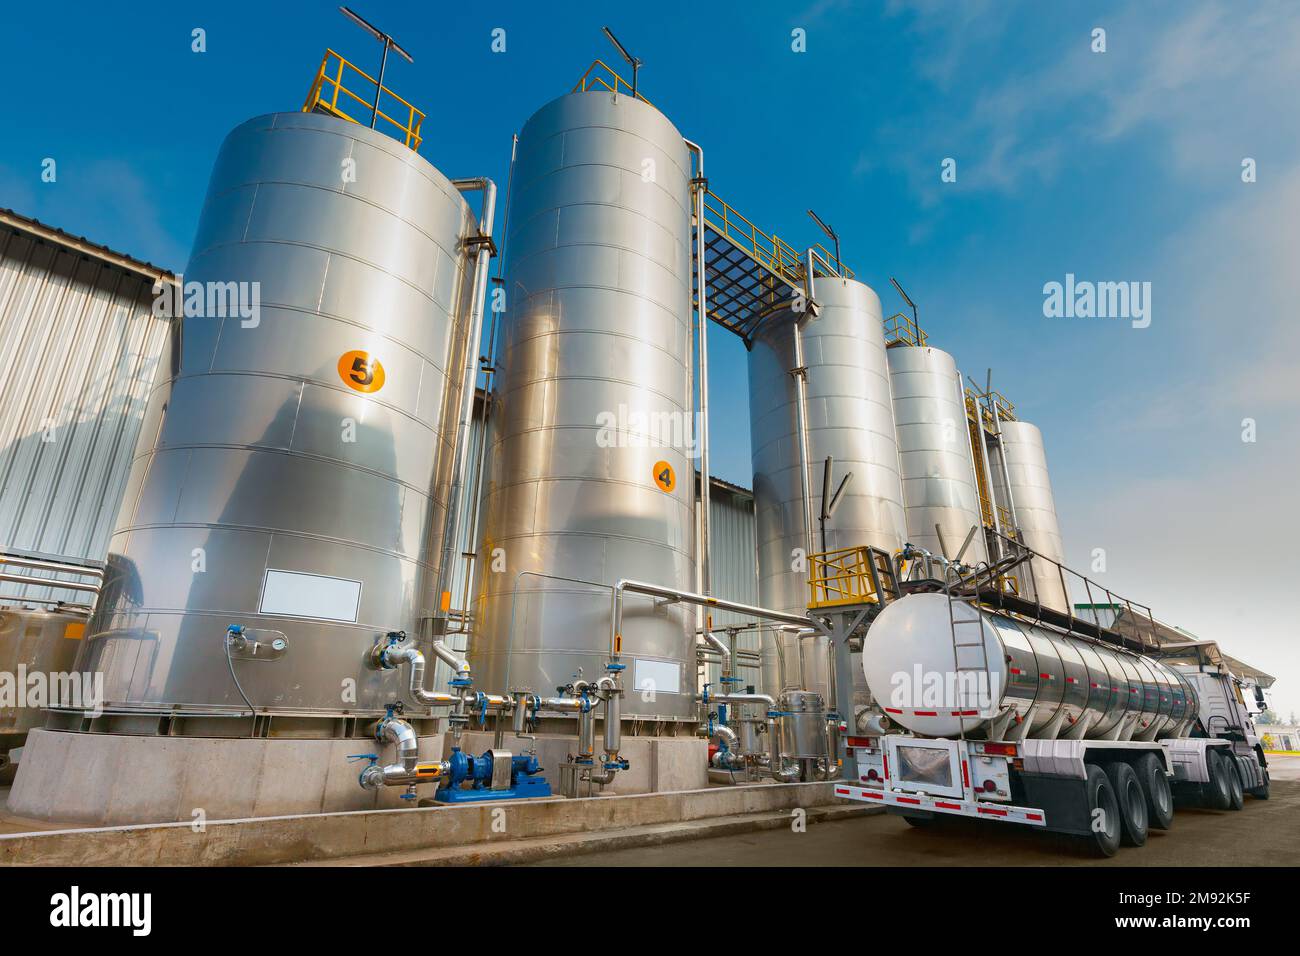 Unloading of silos with chemicals for the food industry Stock Photo